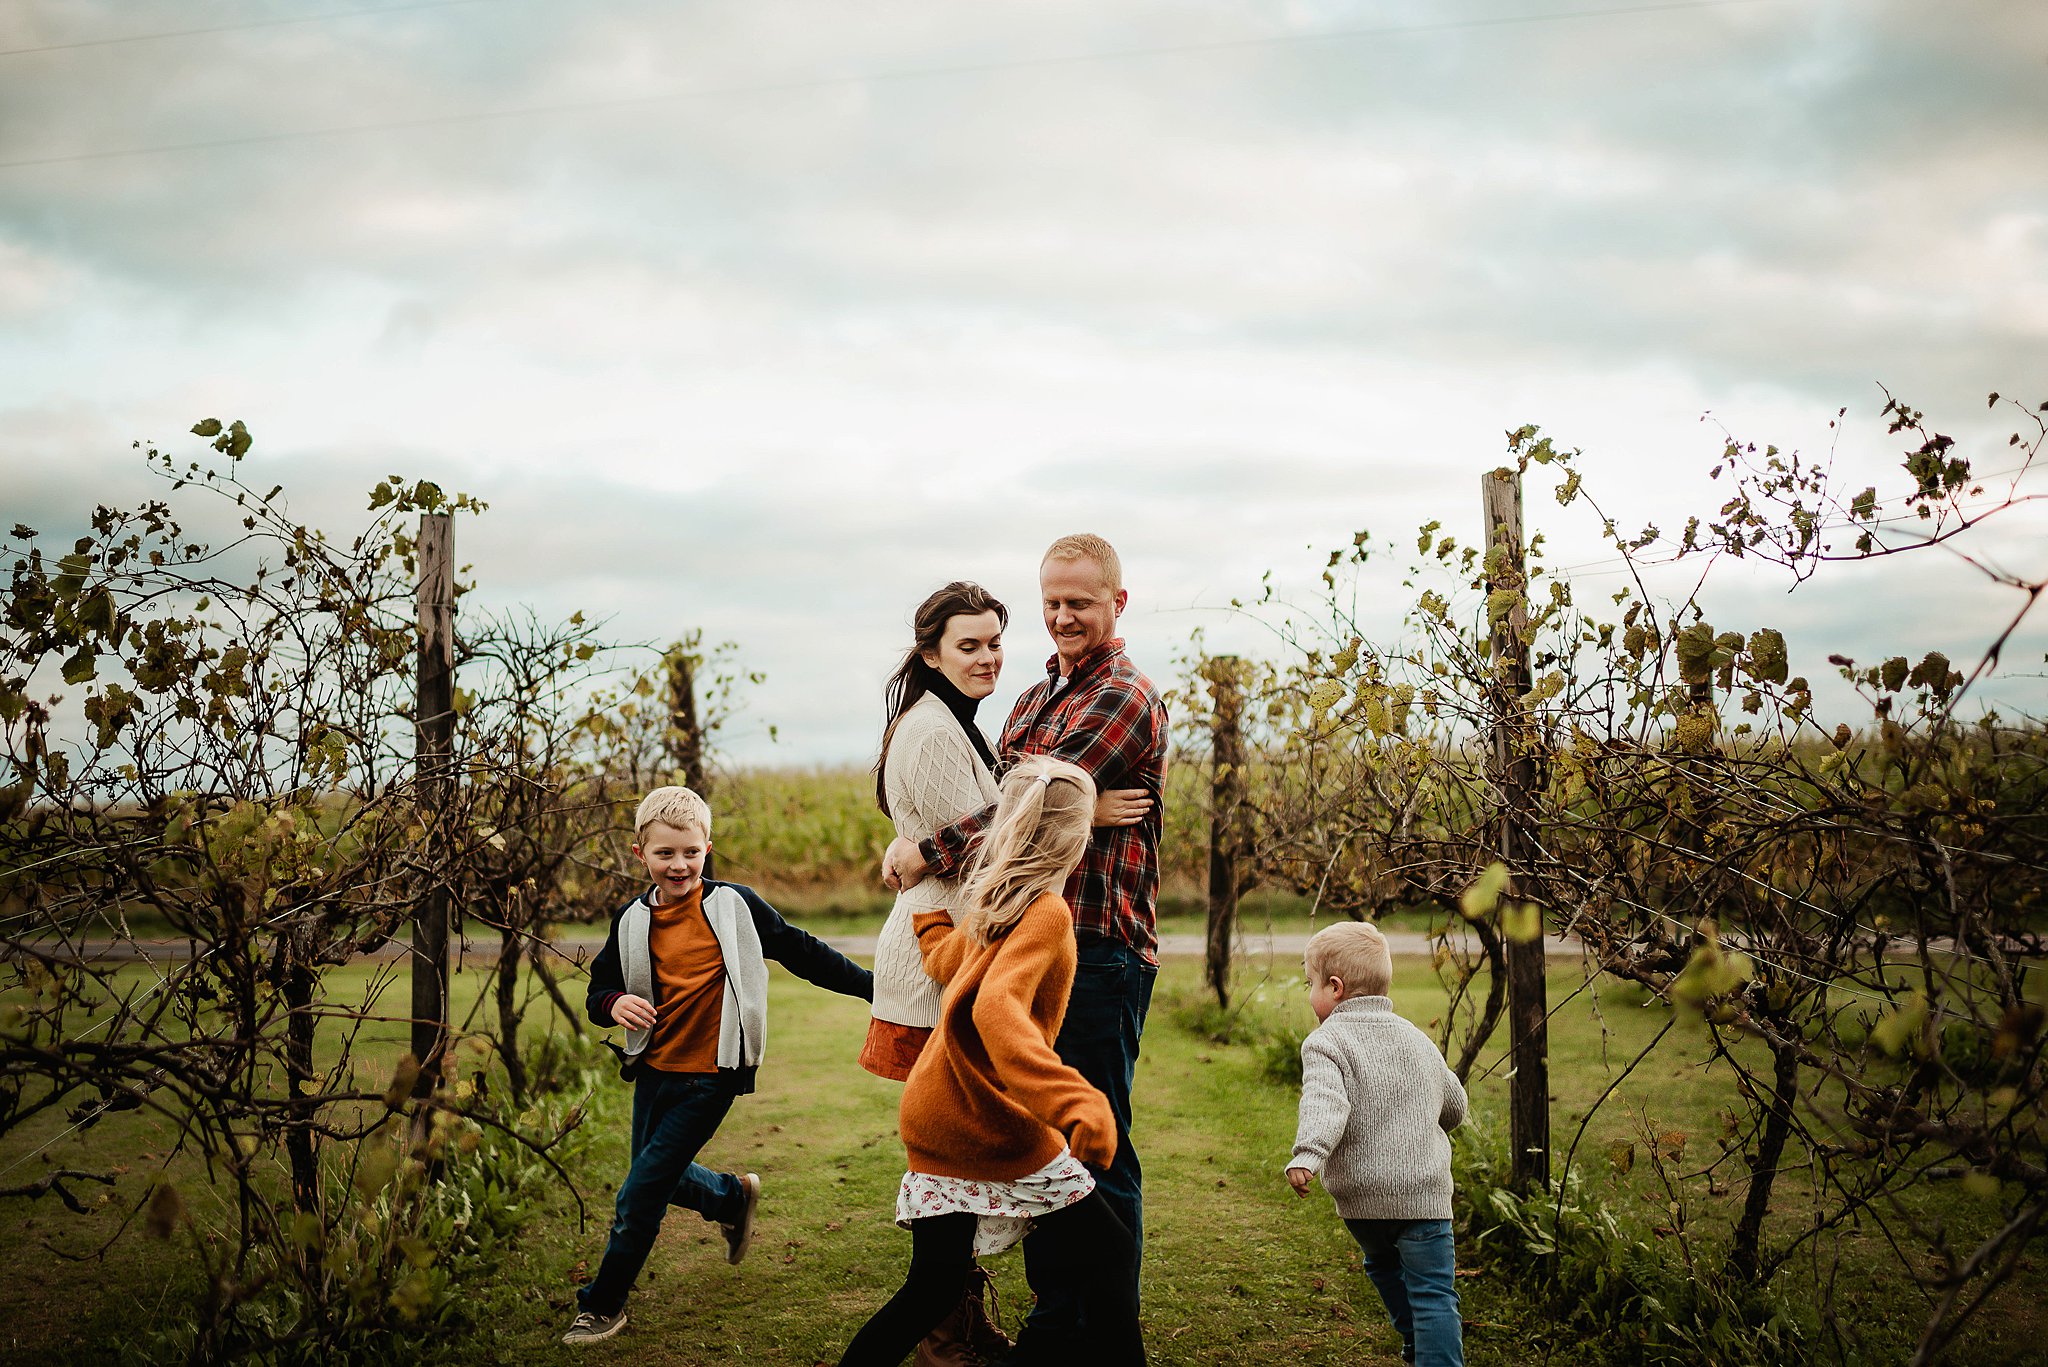 Family of 5 Fall Photo Session at their Private Property in Viroqua, WI